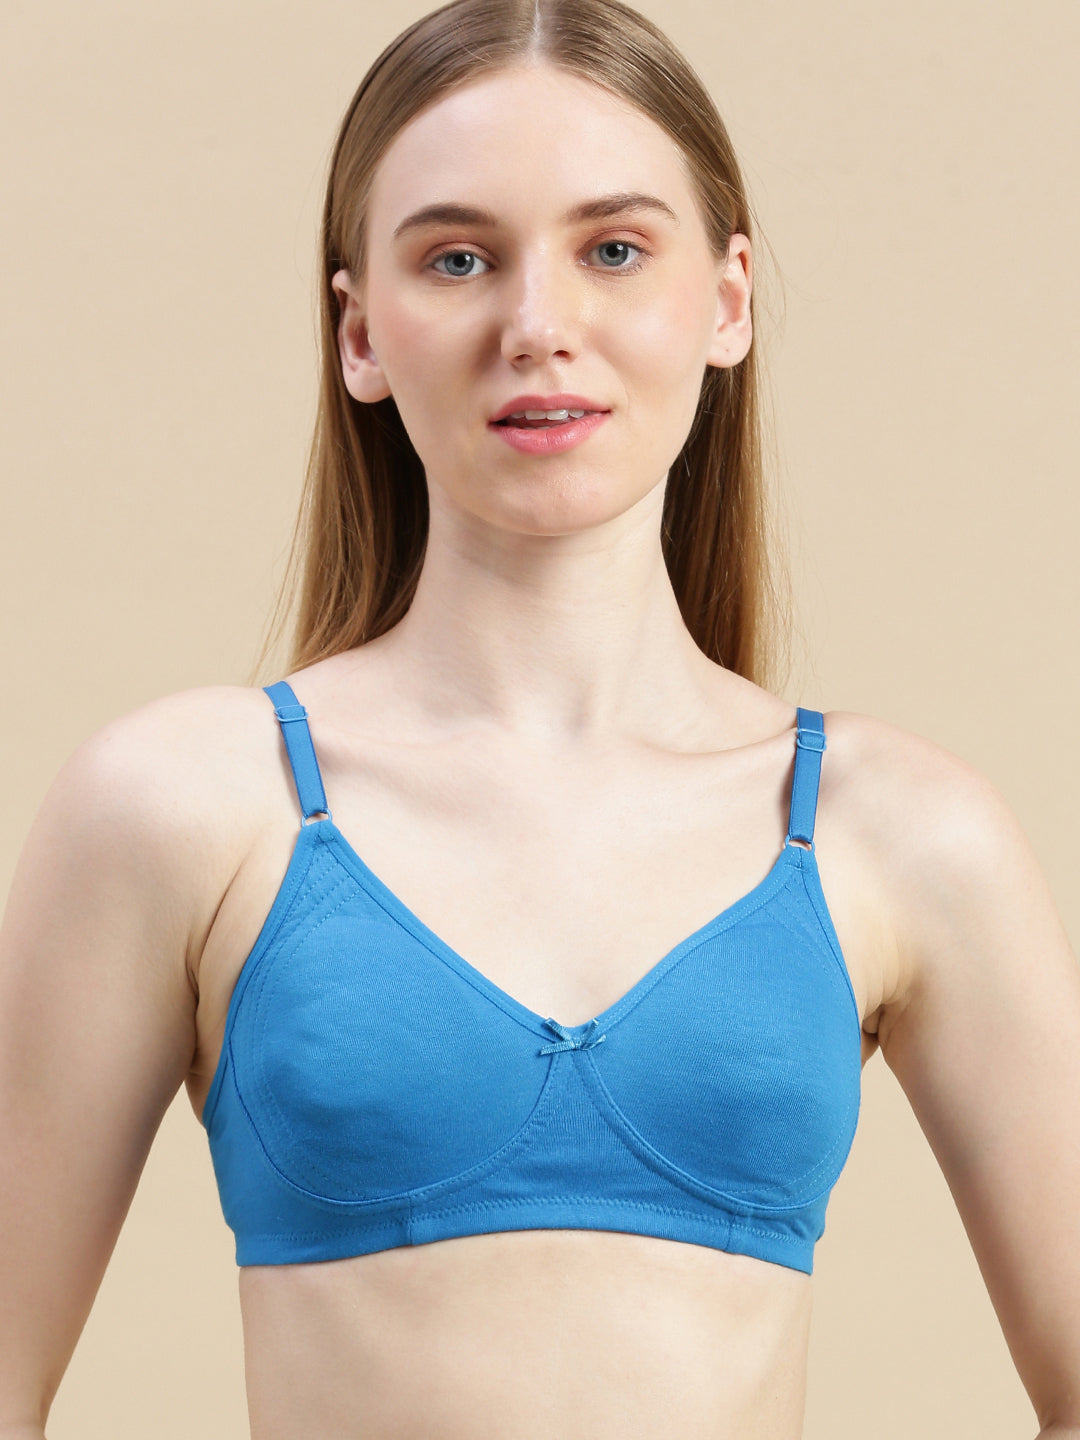 Buy Women's Bras - Comfortable and Stylish Brassieres